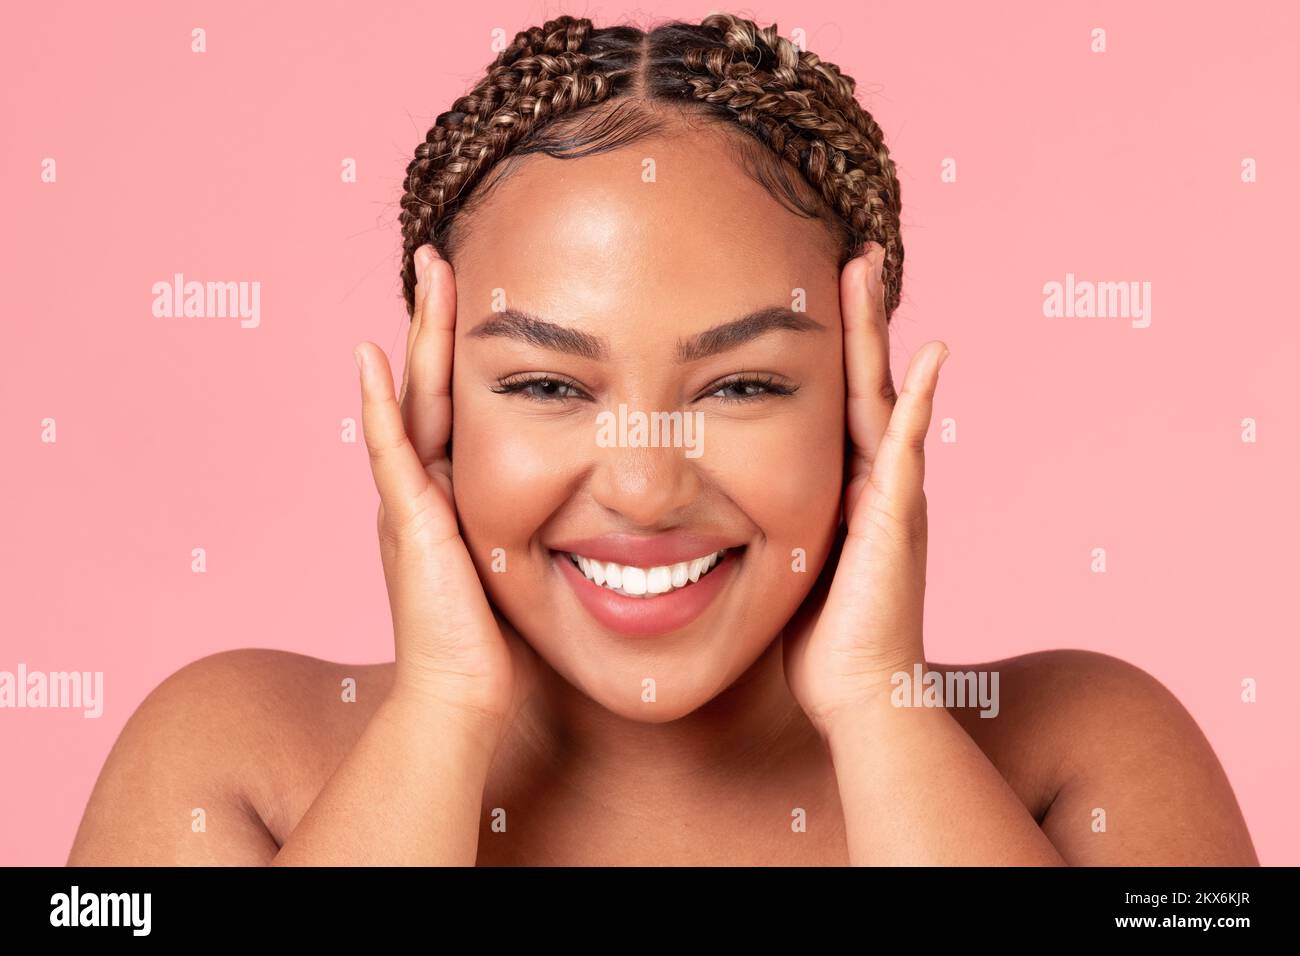 Portrait of happy beautiful african american woman touching her face and smiling at camera, posing over pink background Stock Photo